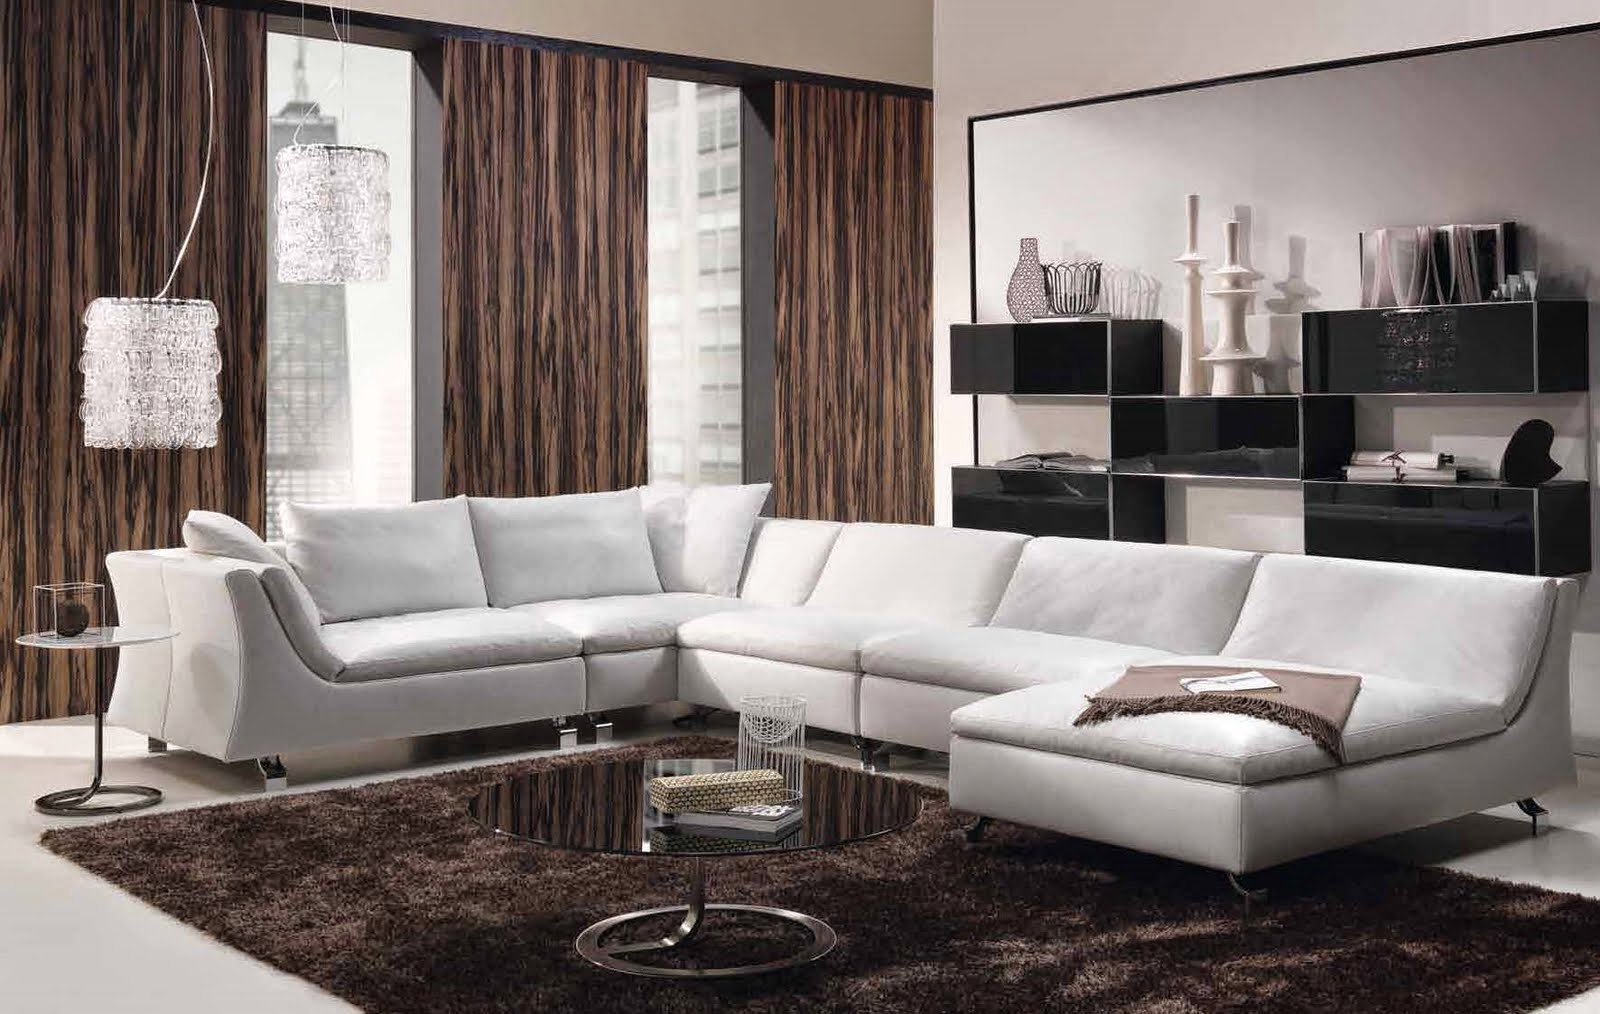 #6 Living Room Decor Ideas With Sectional | Home Design HD Wallpapers